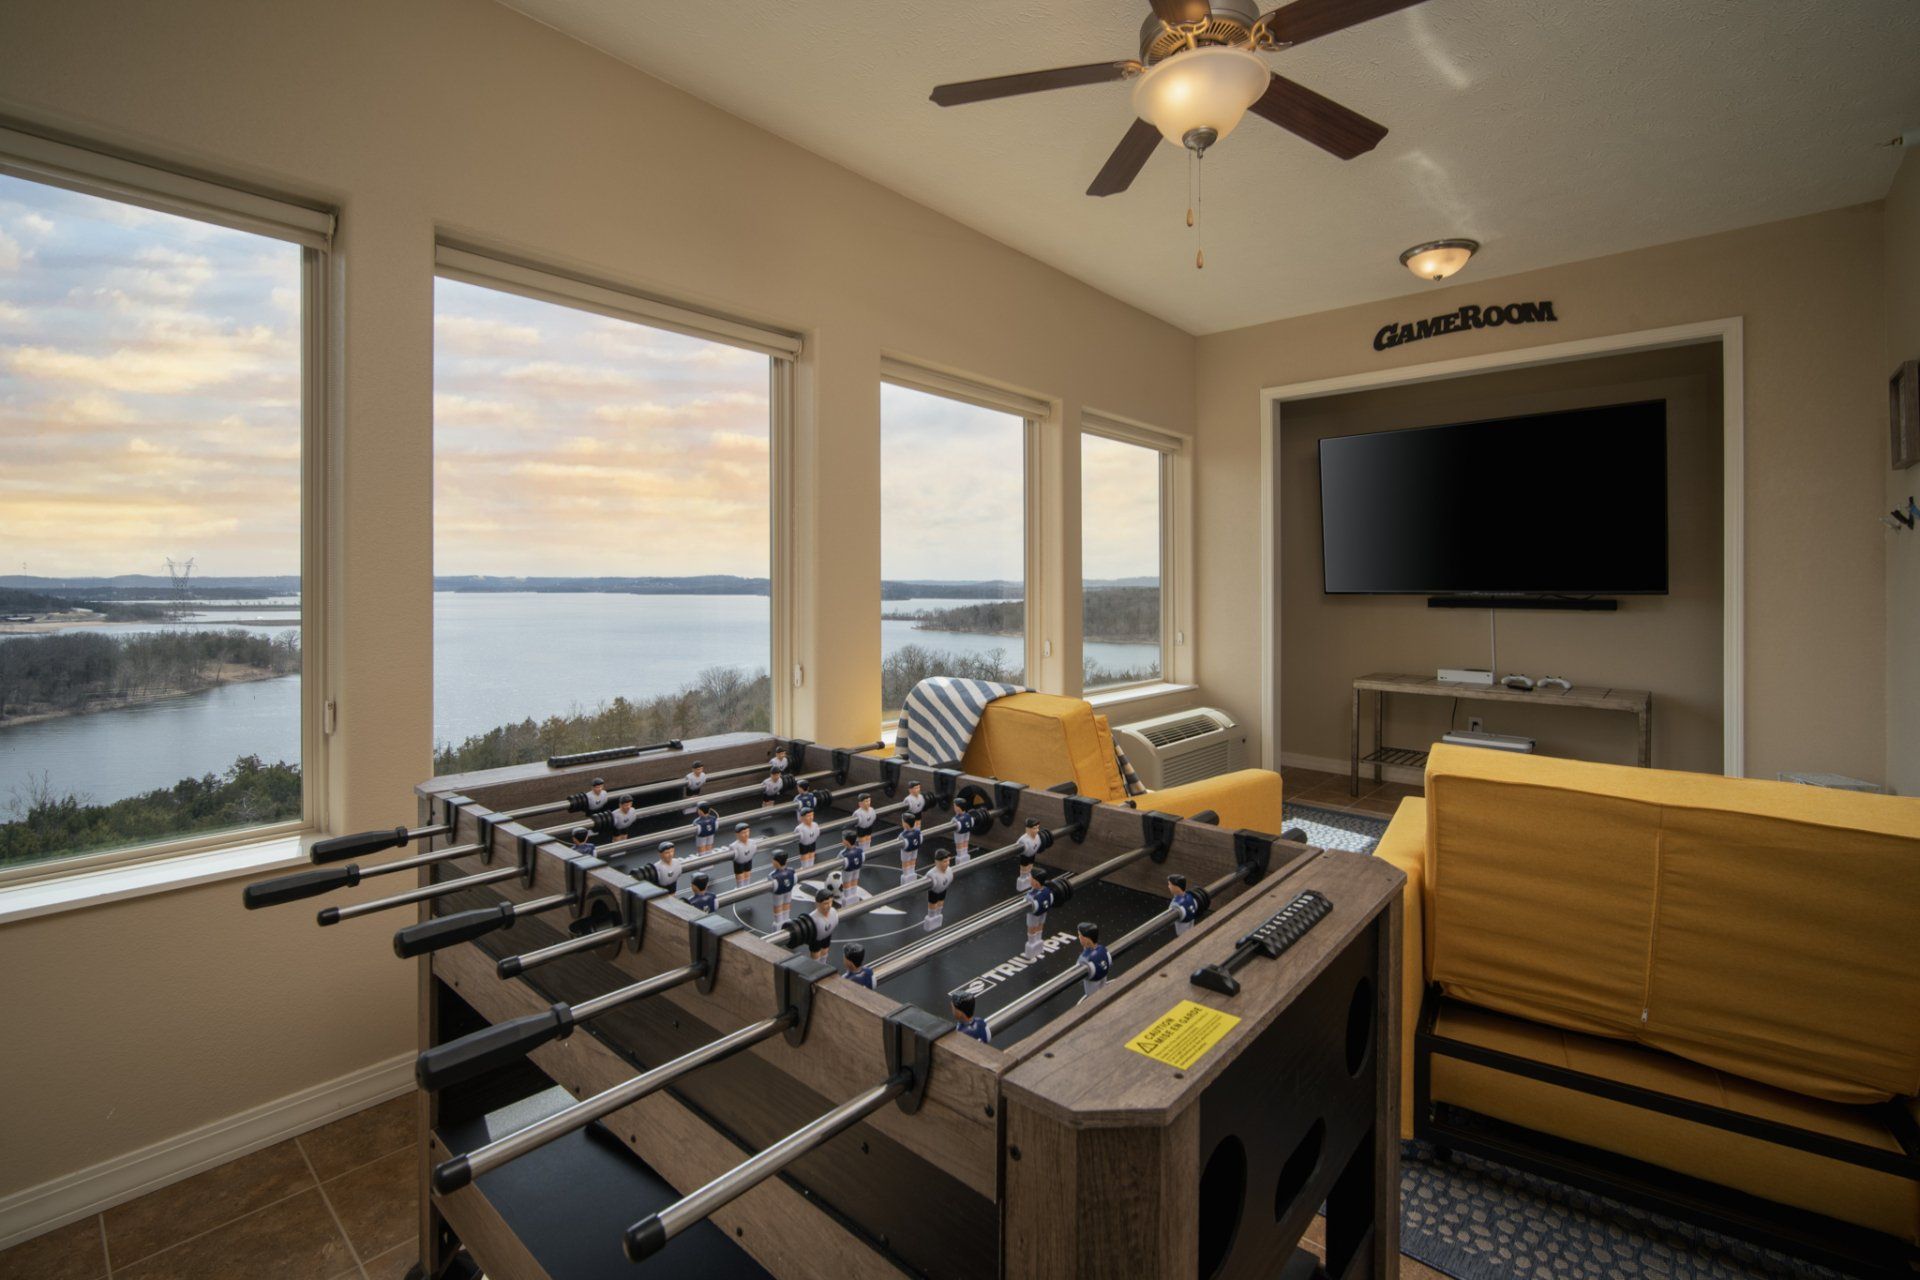 Game room in a short-term rental property with a foosball table and a video game system.